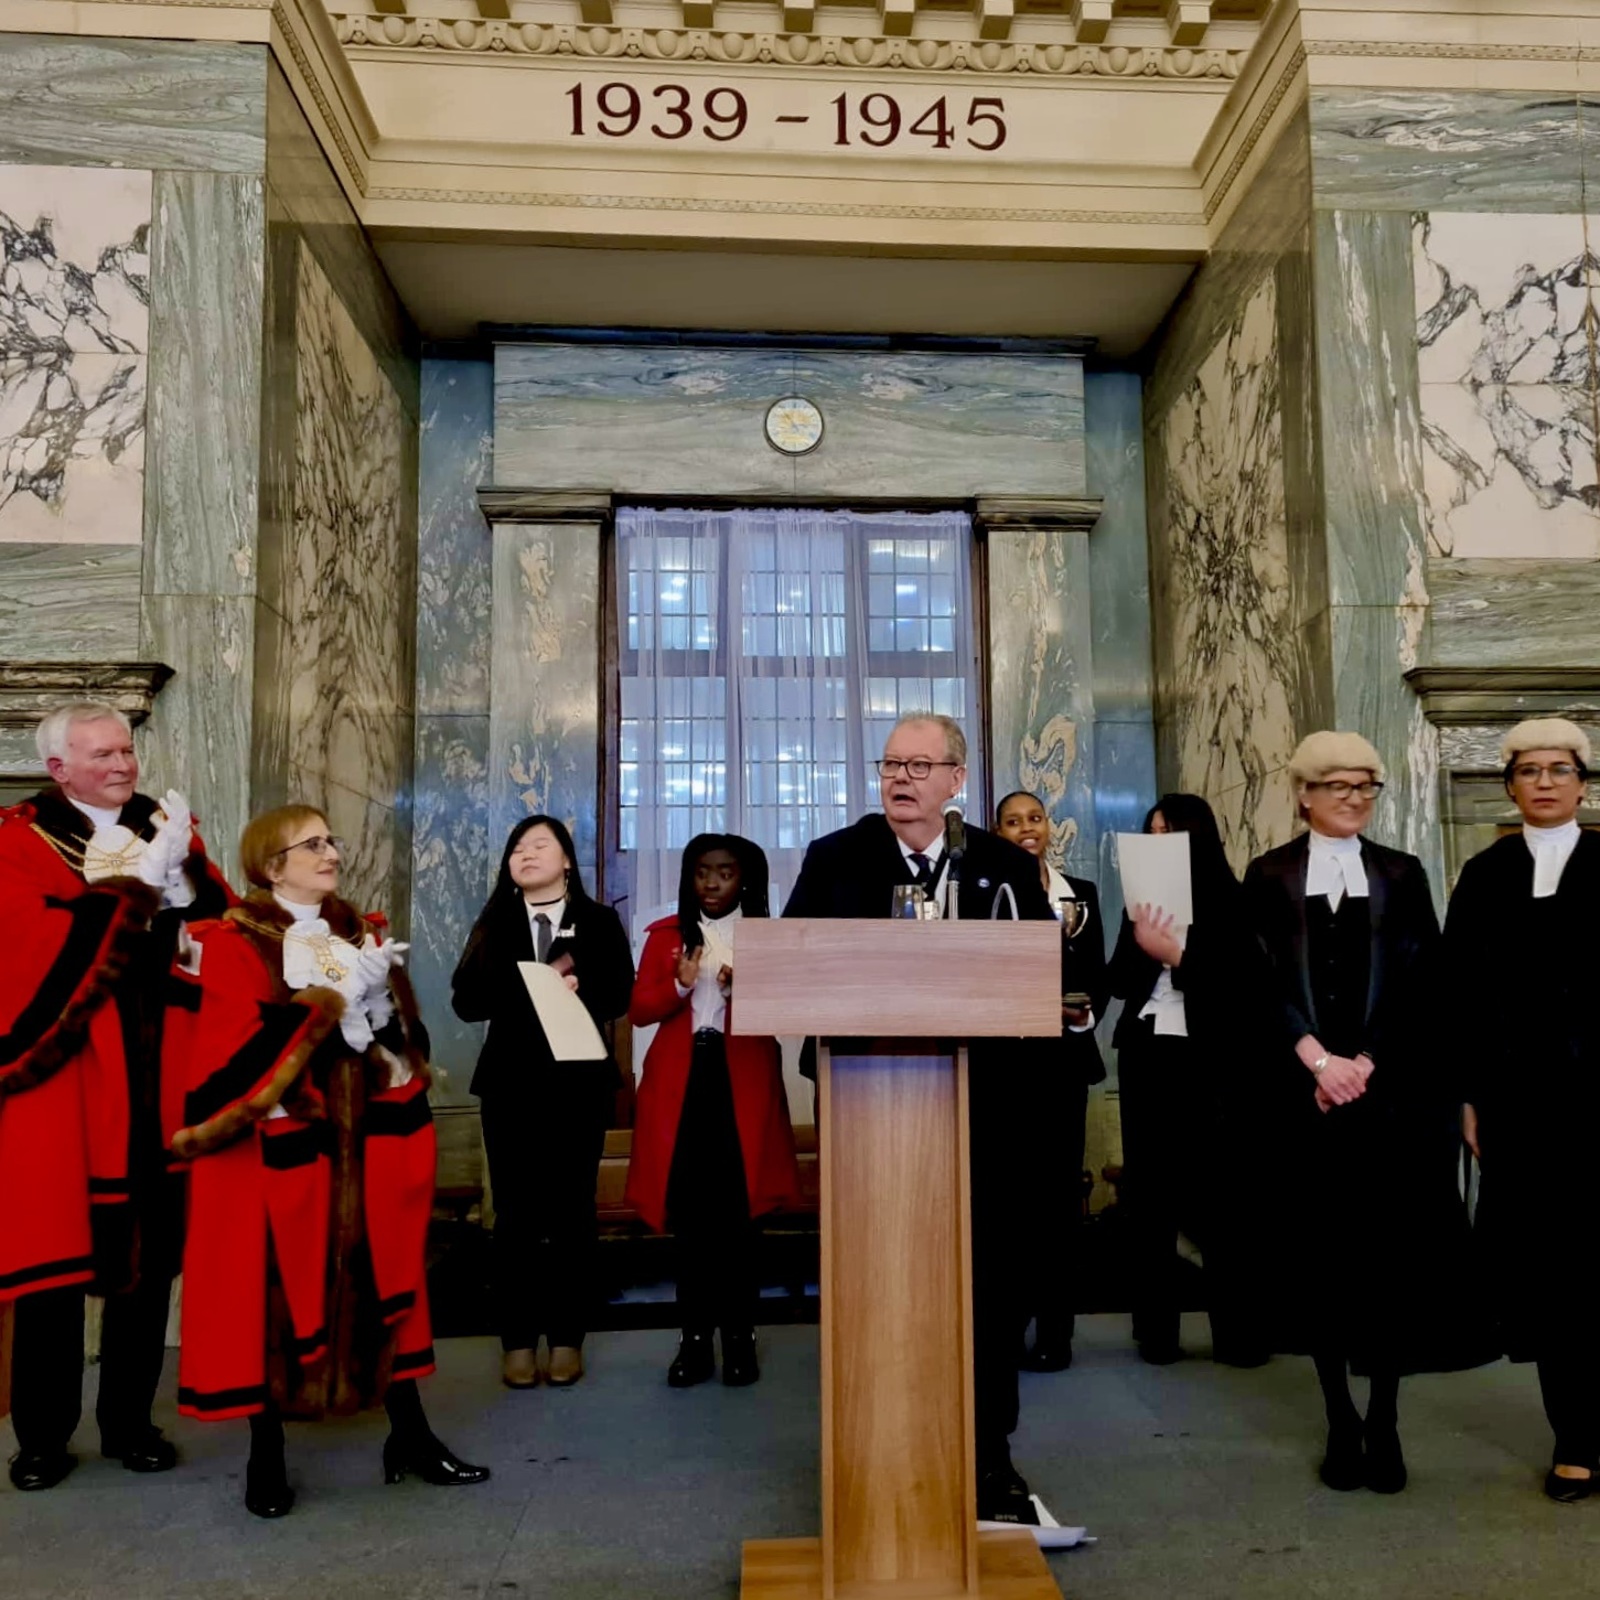 Speaking at the Old Bailey which hosted the 2022 Sheriff’s Challenge